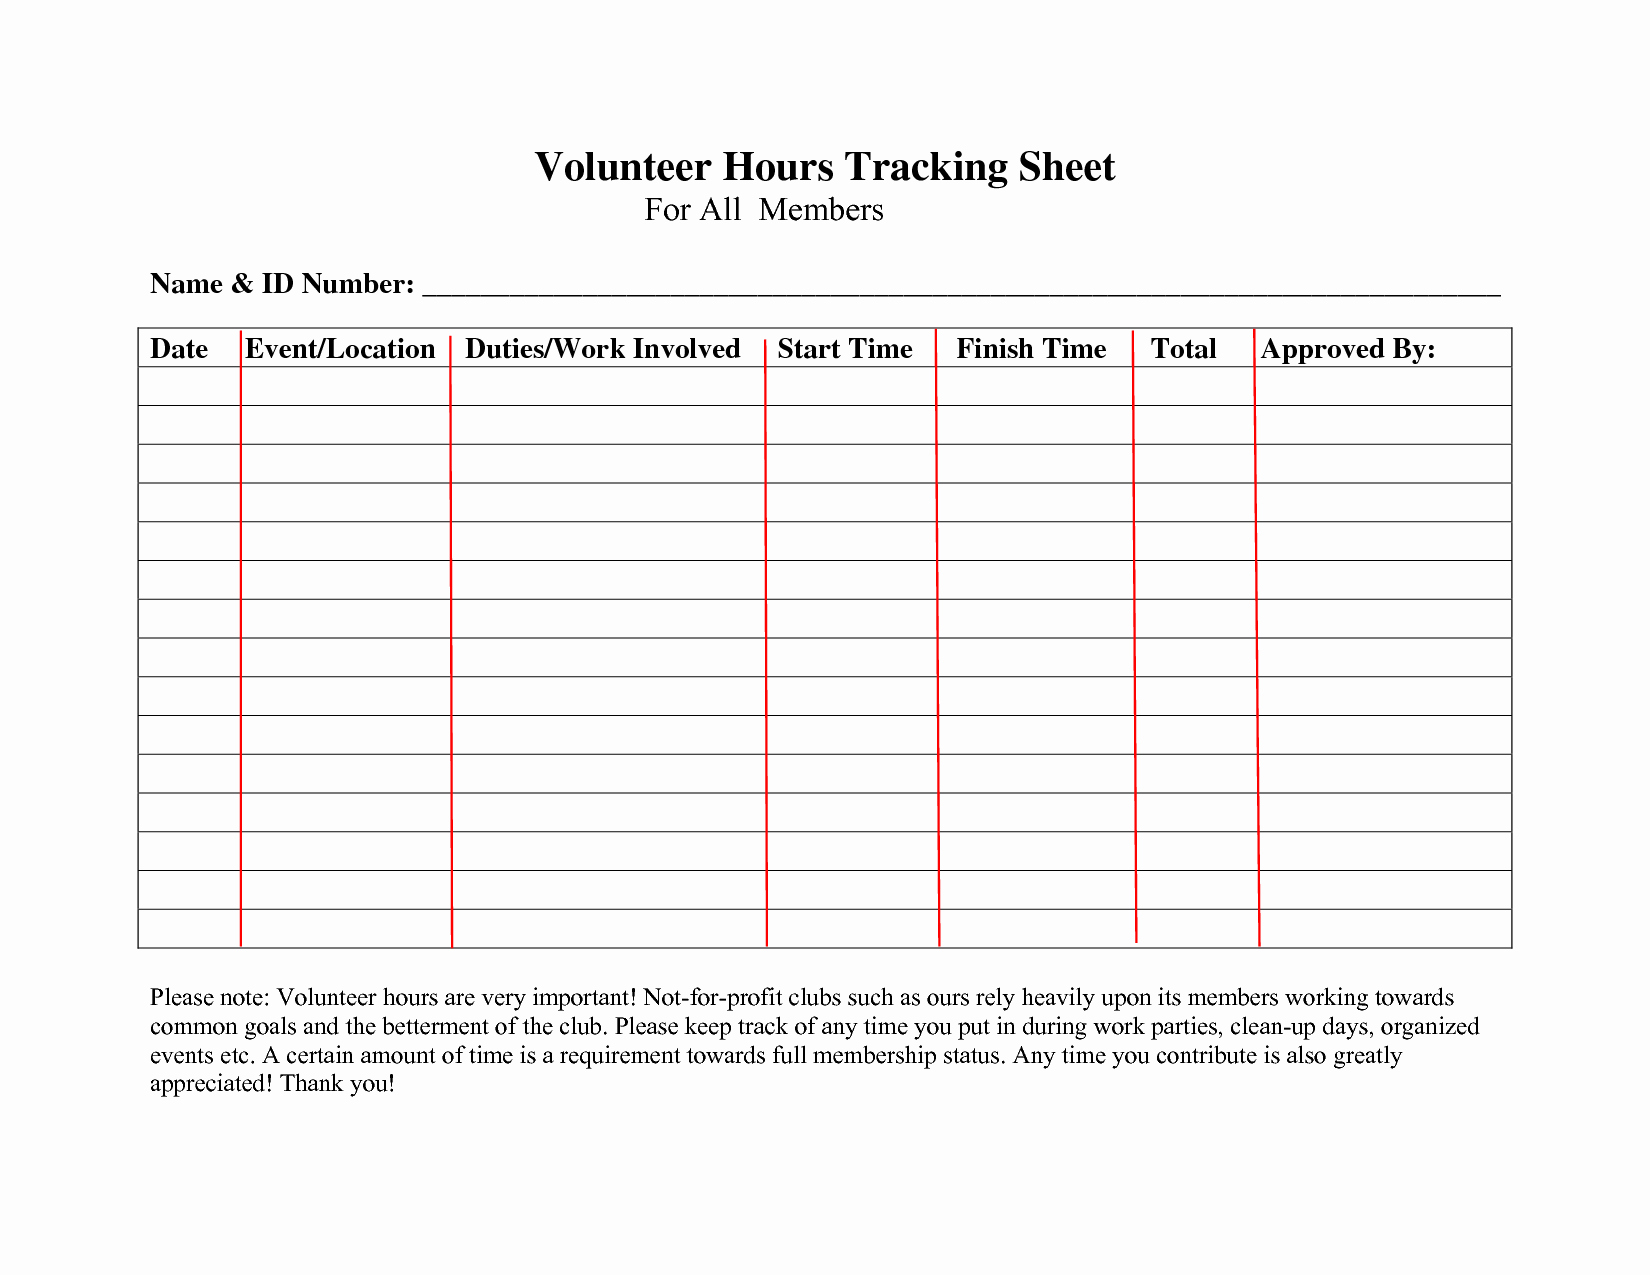 National Junior Honor society Certificate Template Inspirational Volunteer Hours Log Sheet Template forms